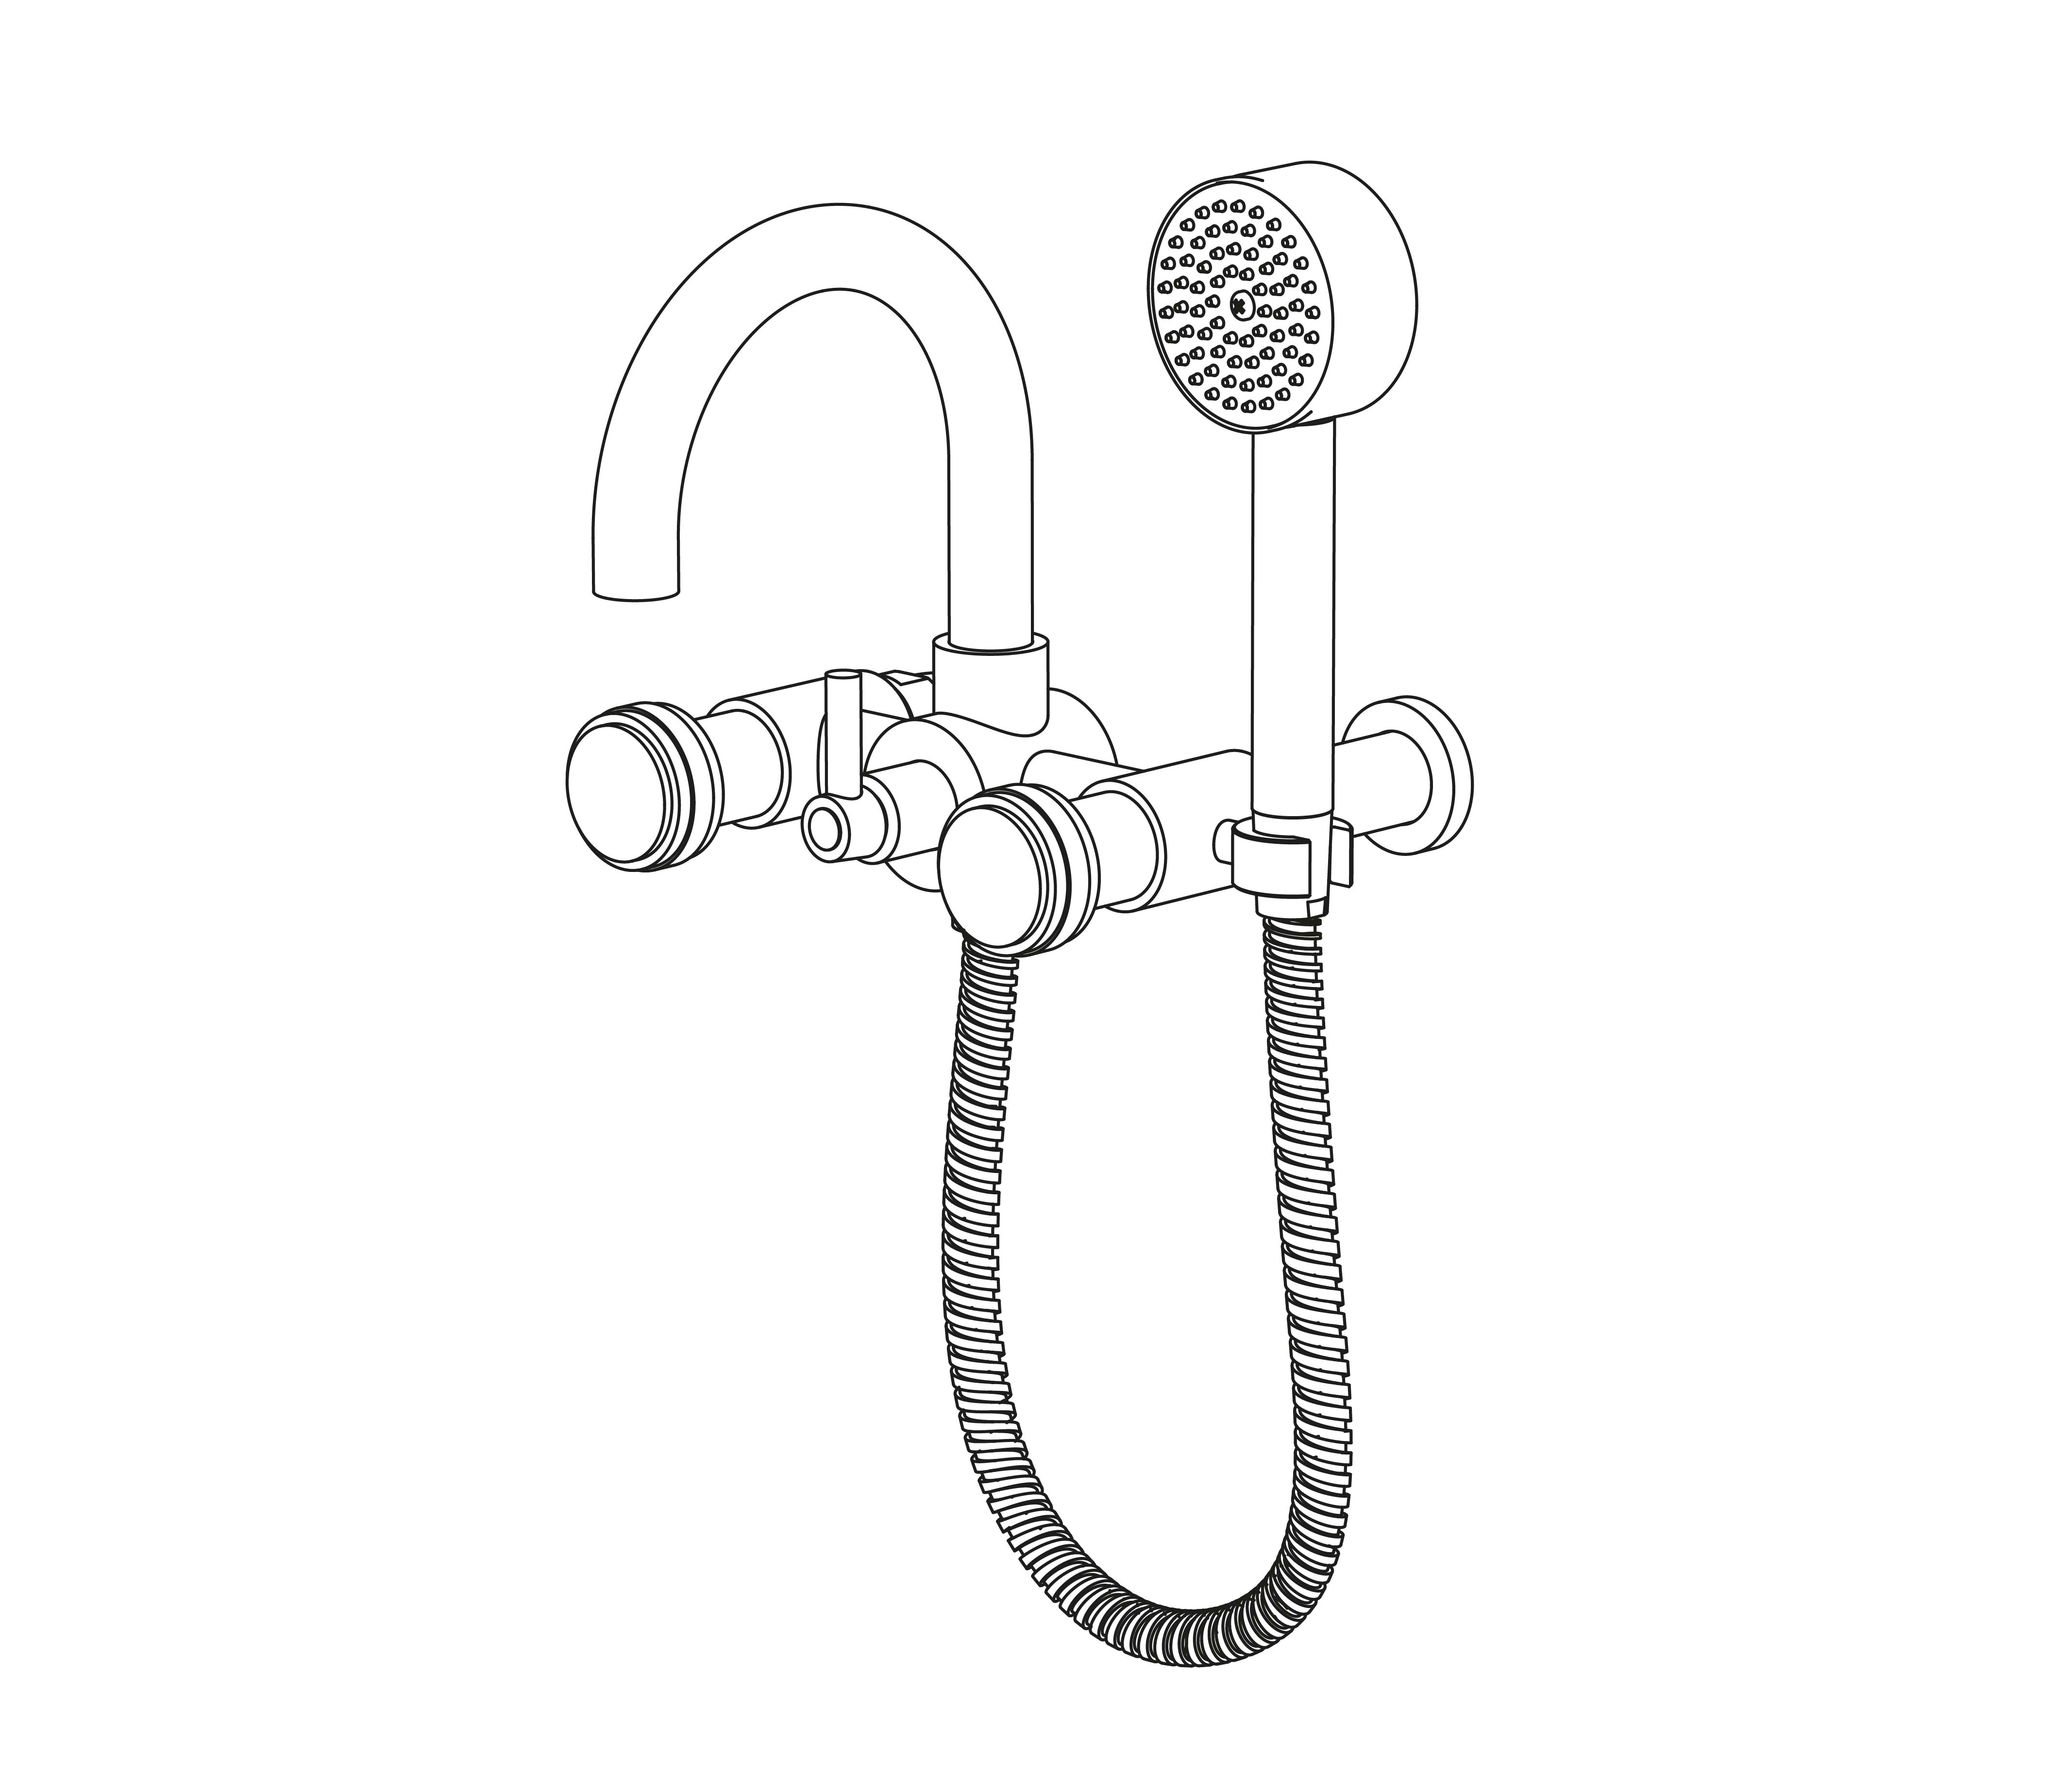 C29-3201 Wall mounted bath and shower mixer